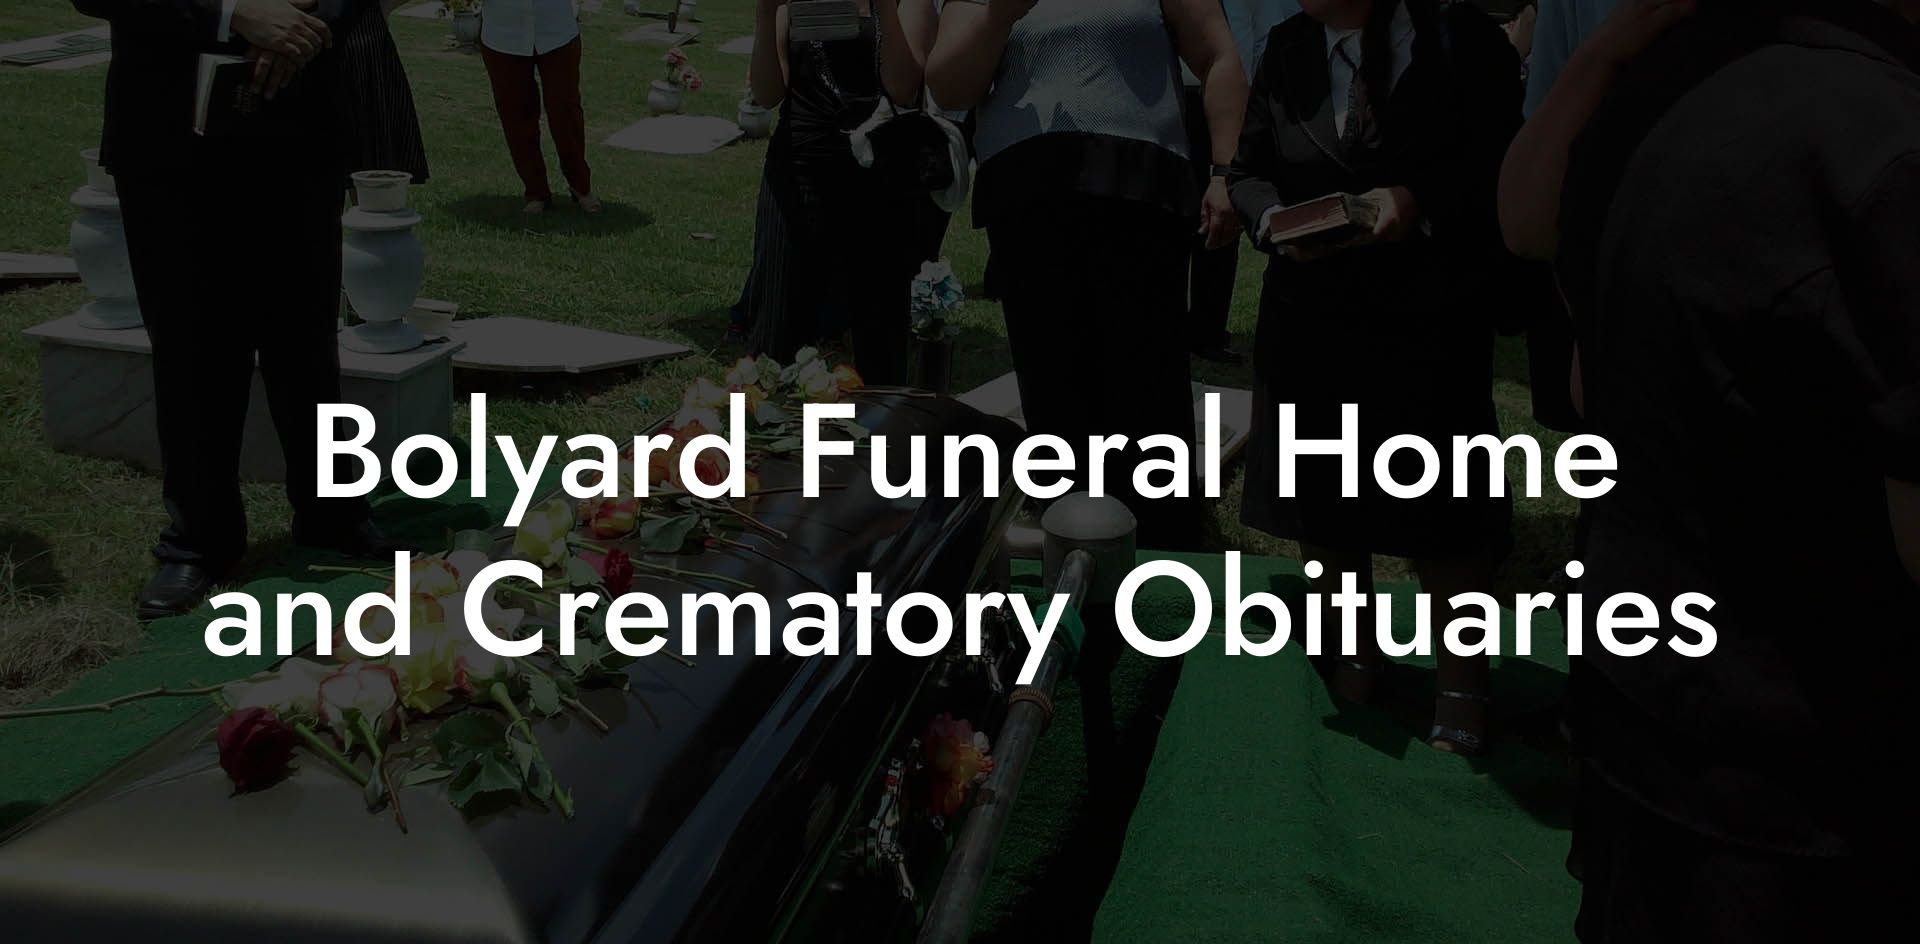 Bolyard Funeral Home and Crematory Obituaries